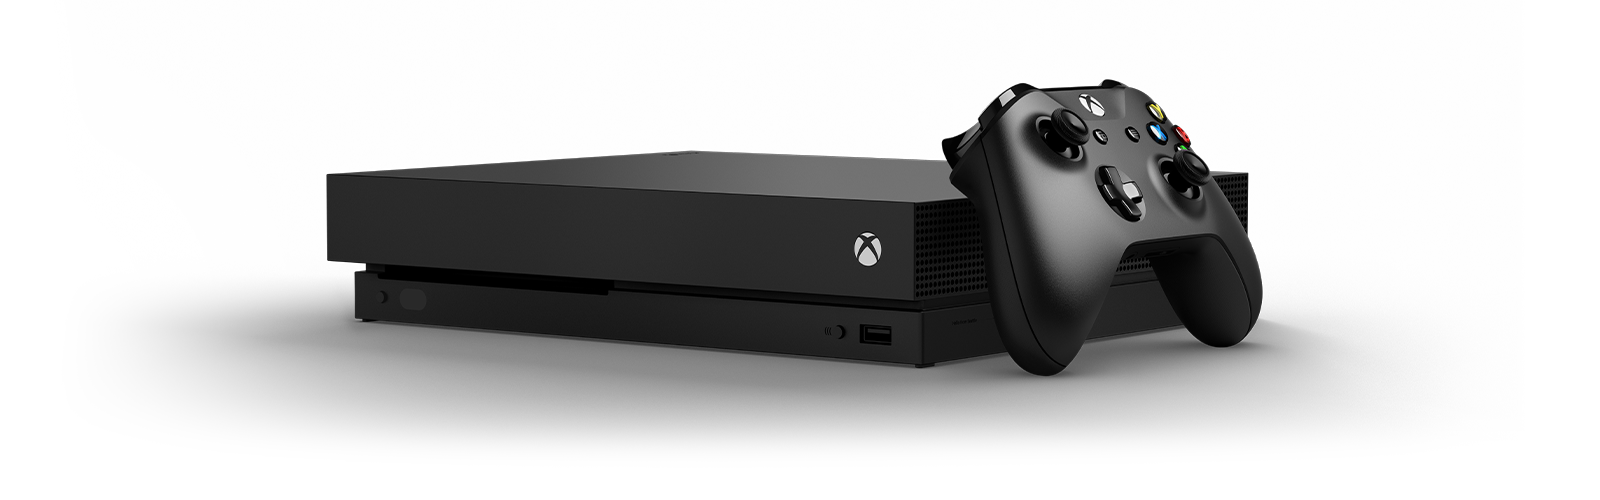 Télécharger photo xbox one x png